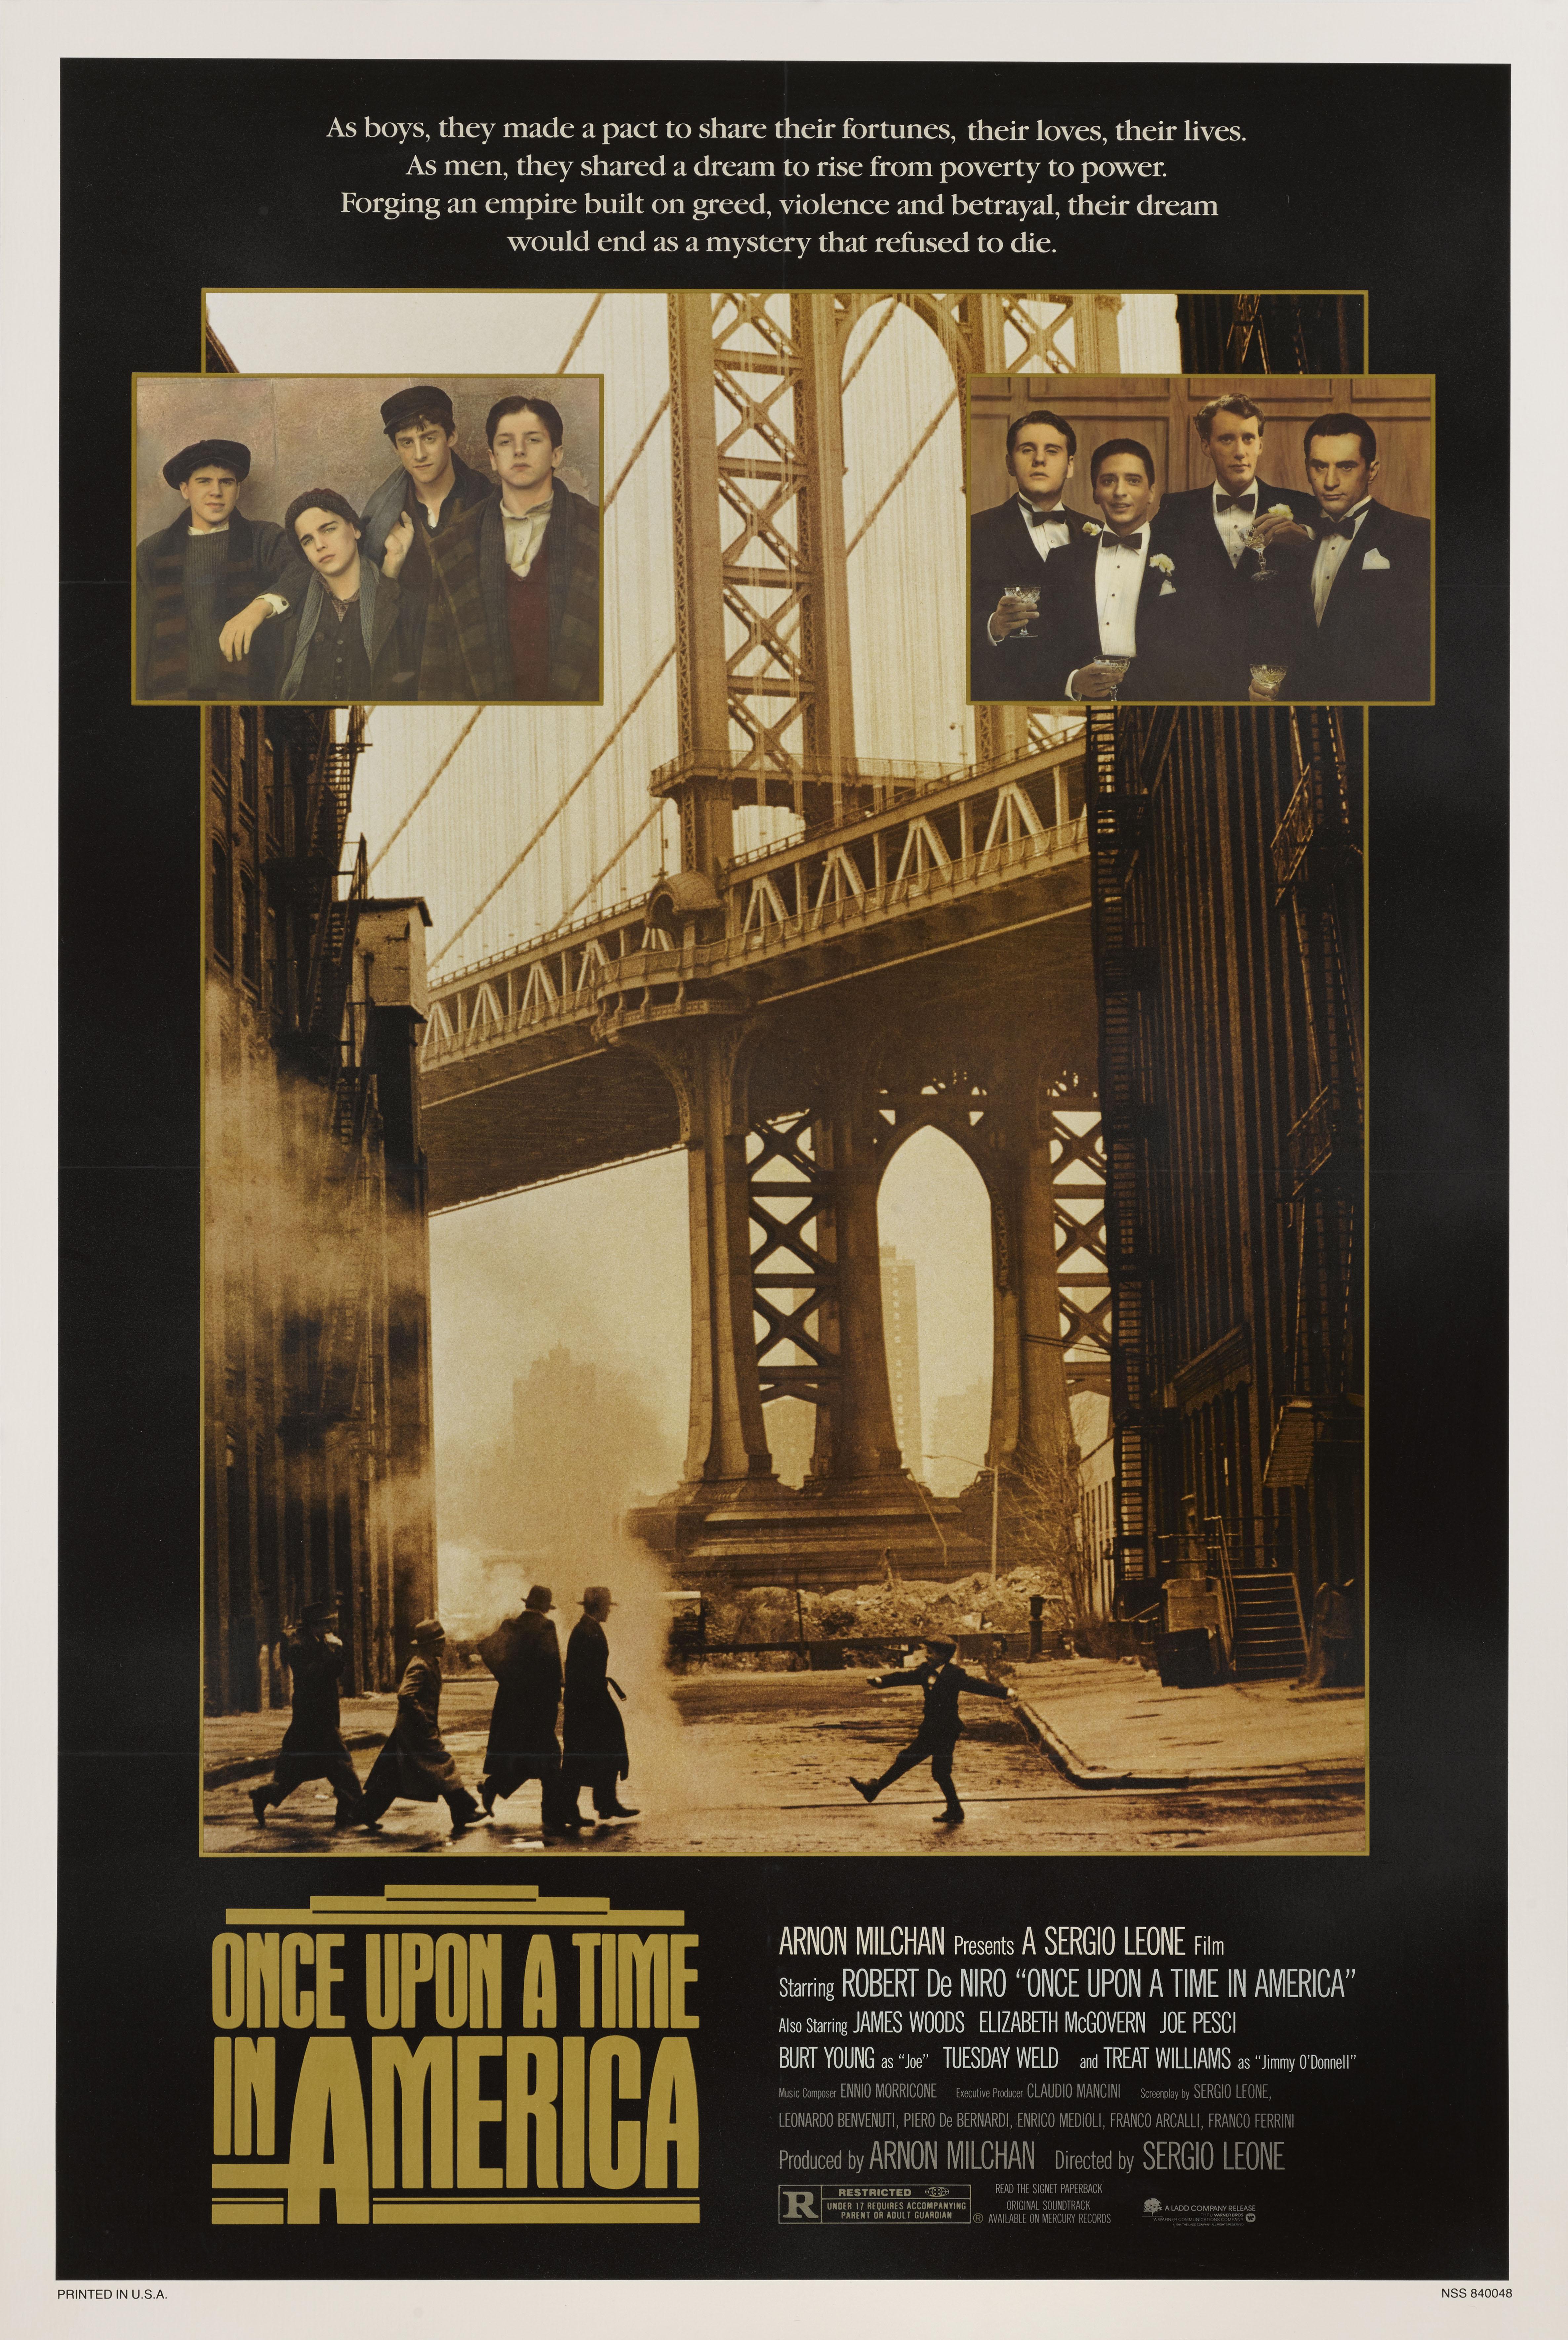 Original US movie poster for Sergio Leone'd classic 1984 gangster film starring Robert De Niro, James Woods and Joe Pesci. This poster is conservation linen backed and would be shipped rolled in a strong tube.